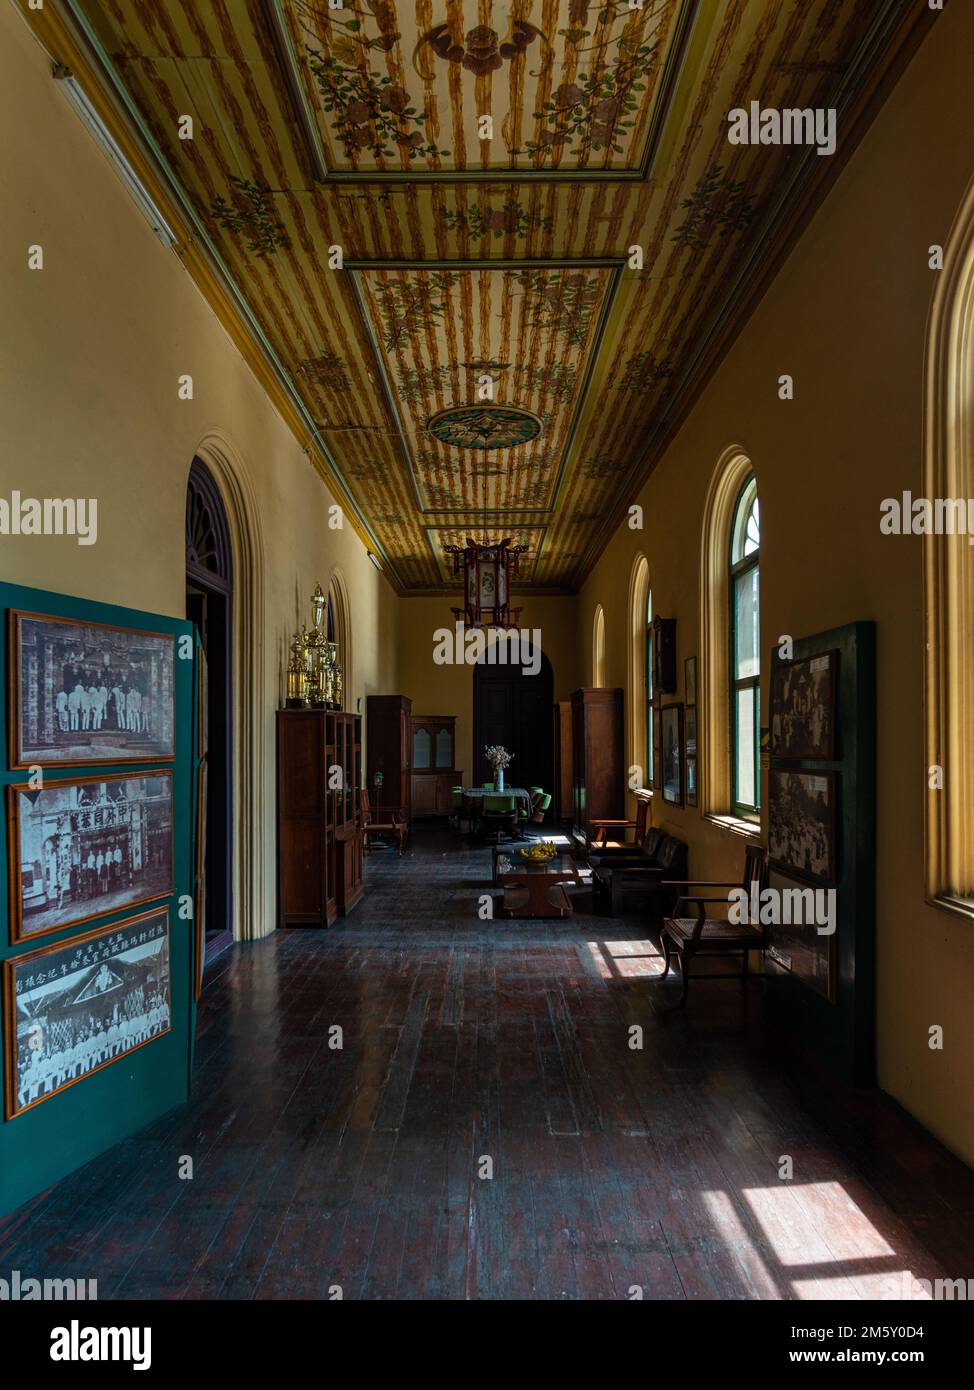 Medan, Indonesia - July 21, 2022: One salon of an heritage house. Taken on an overcast day with no people. Stock Photo